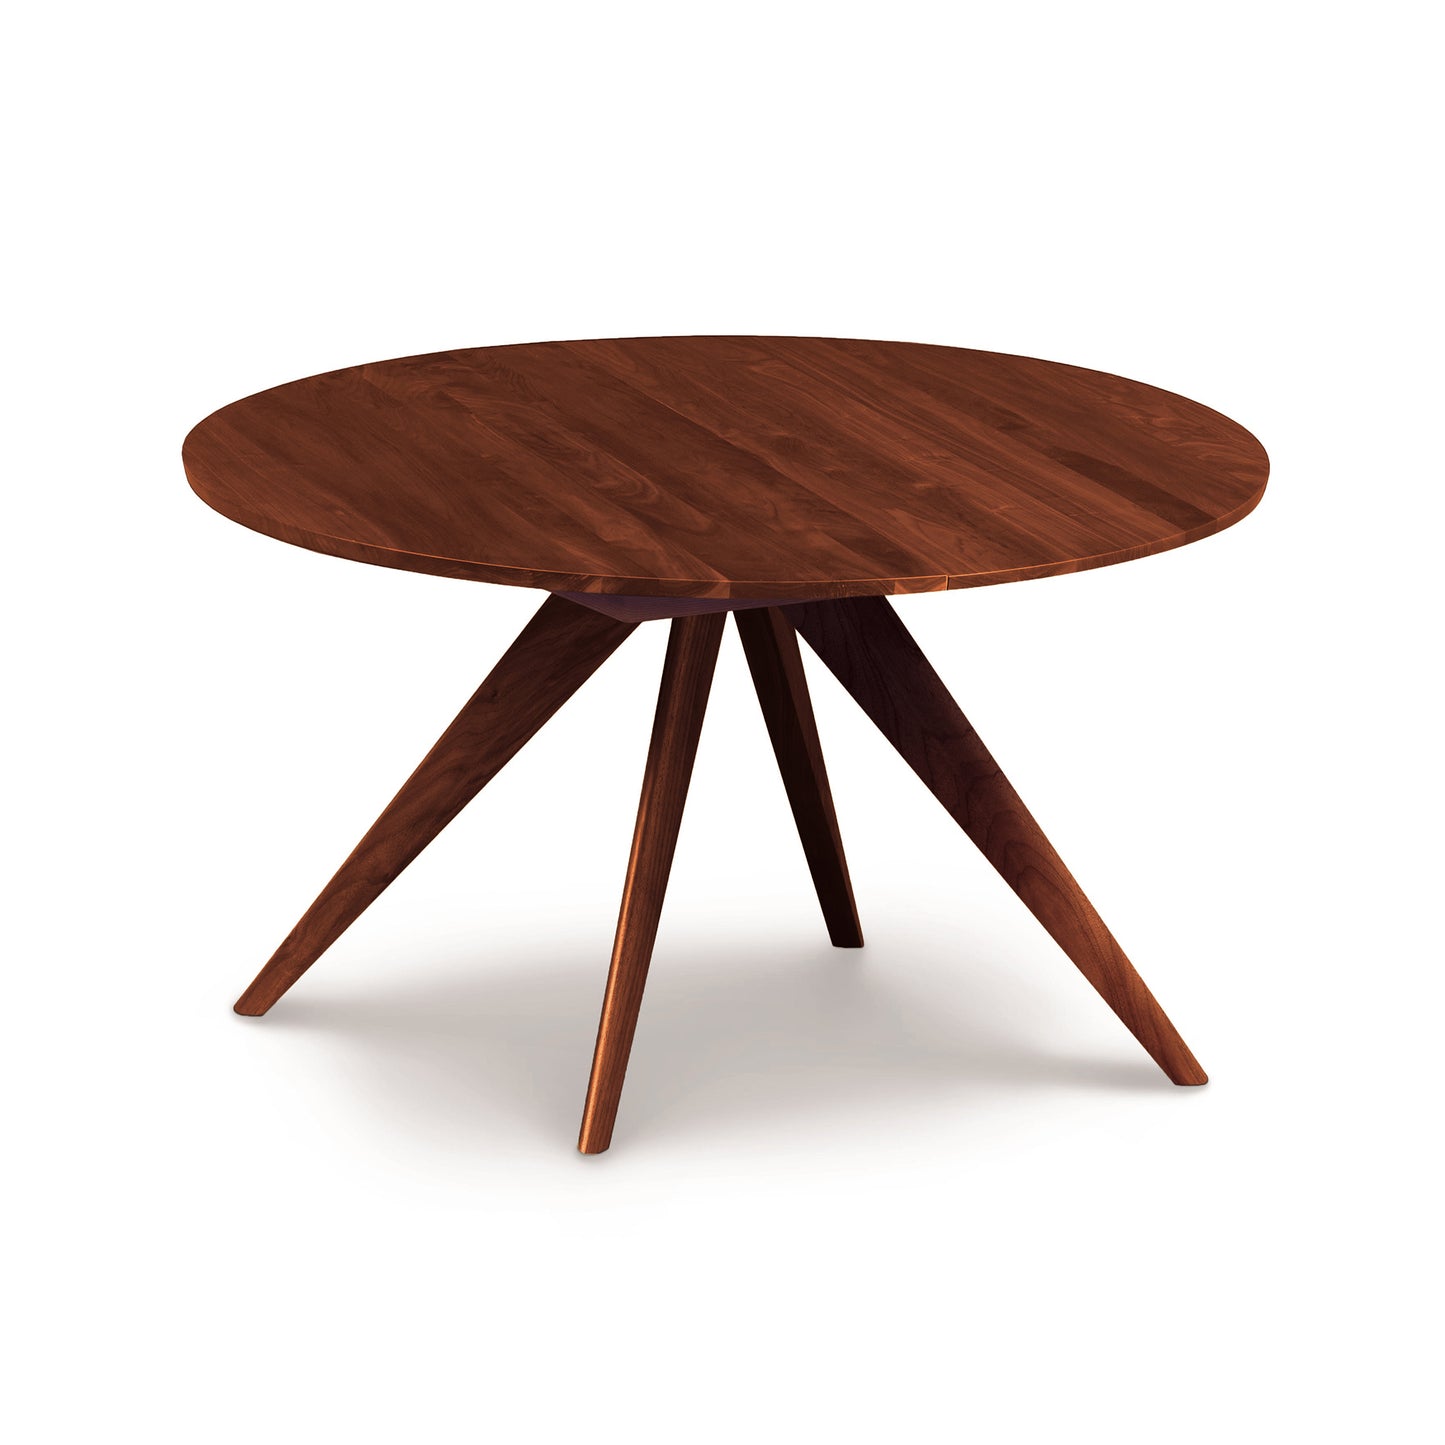 A round Copeland Furniture Catalina Round Extension Table with four angled legs on a white background, crafted from solid North American wood.